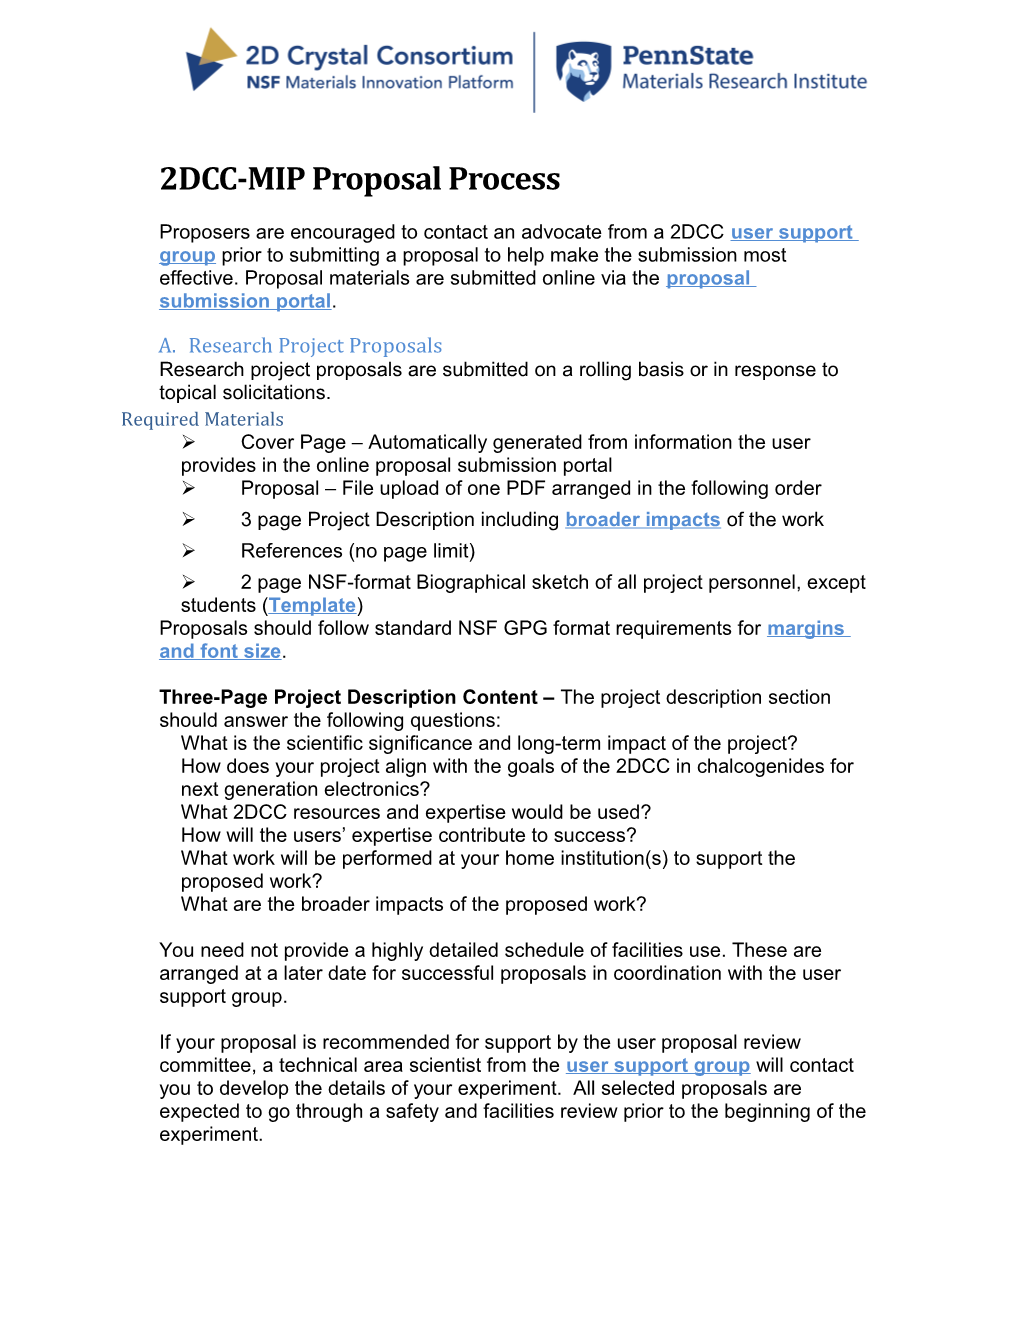 2DCC Proposal Process- Last Updated OCTOBER 24, 2016